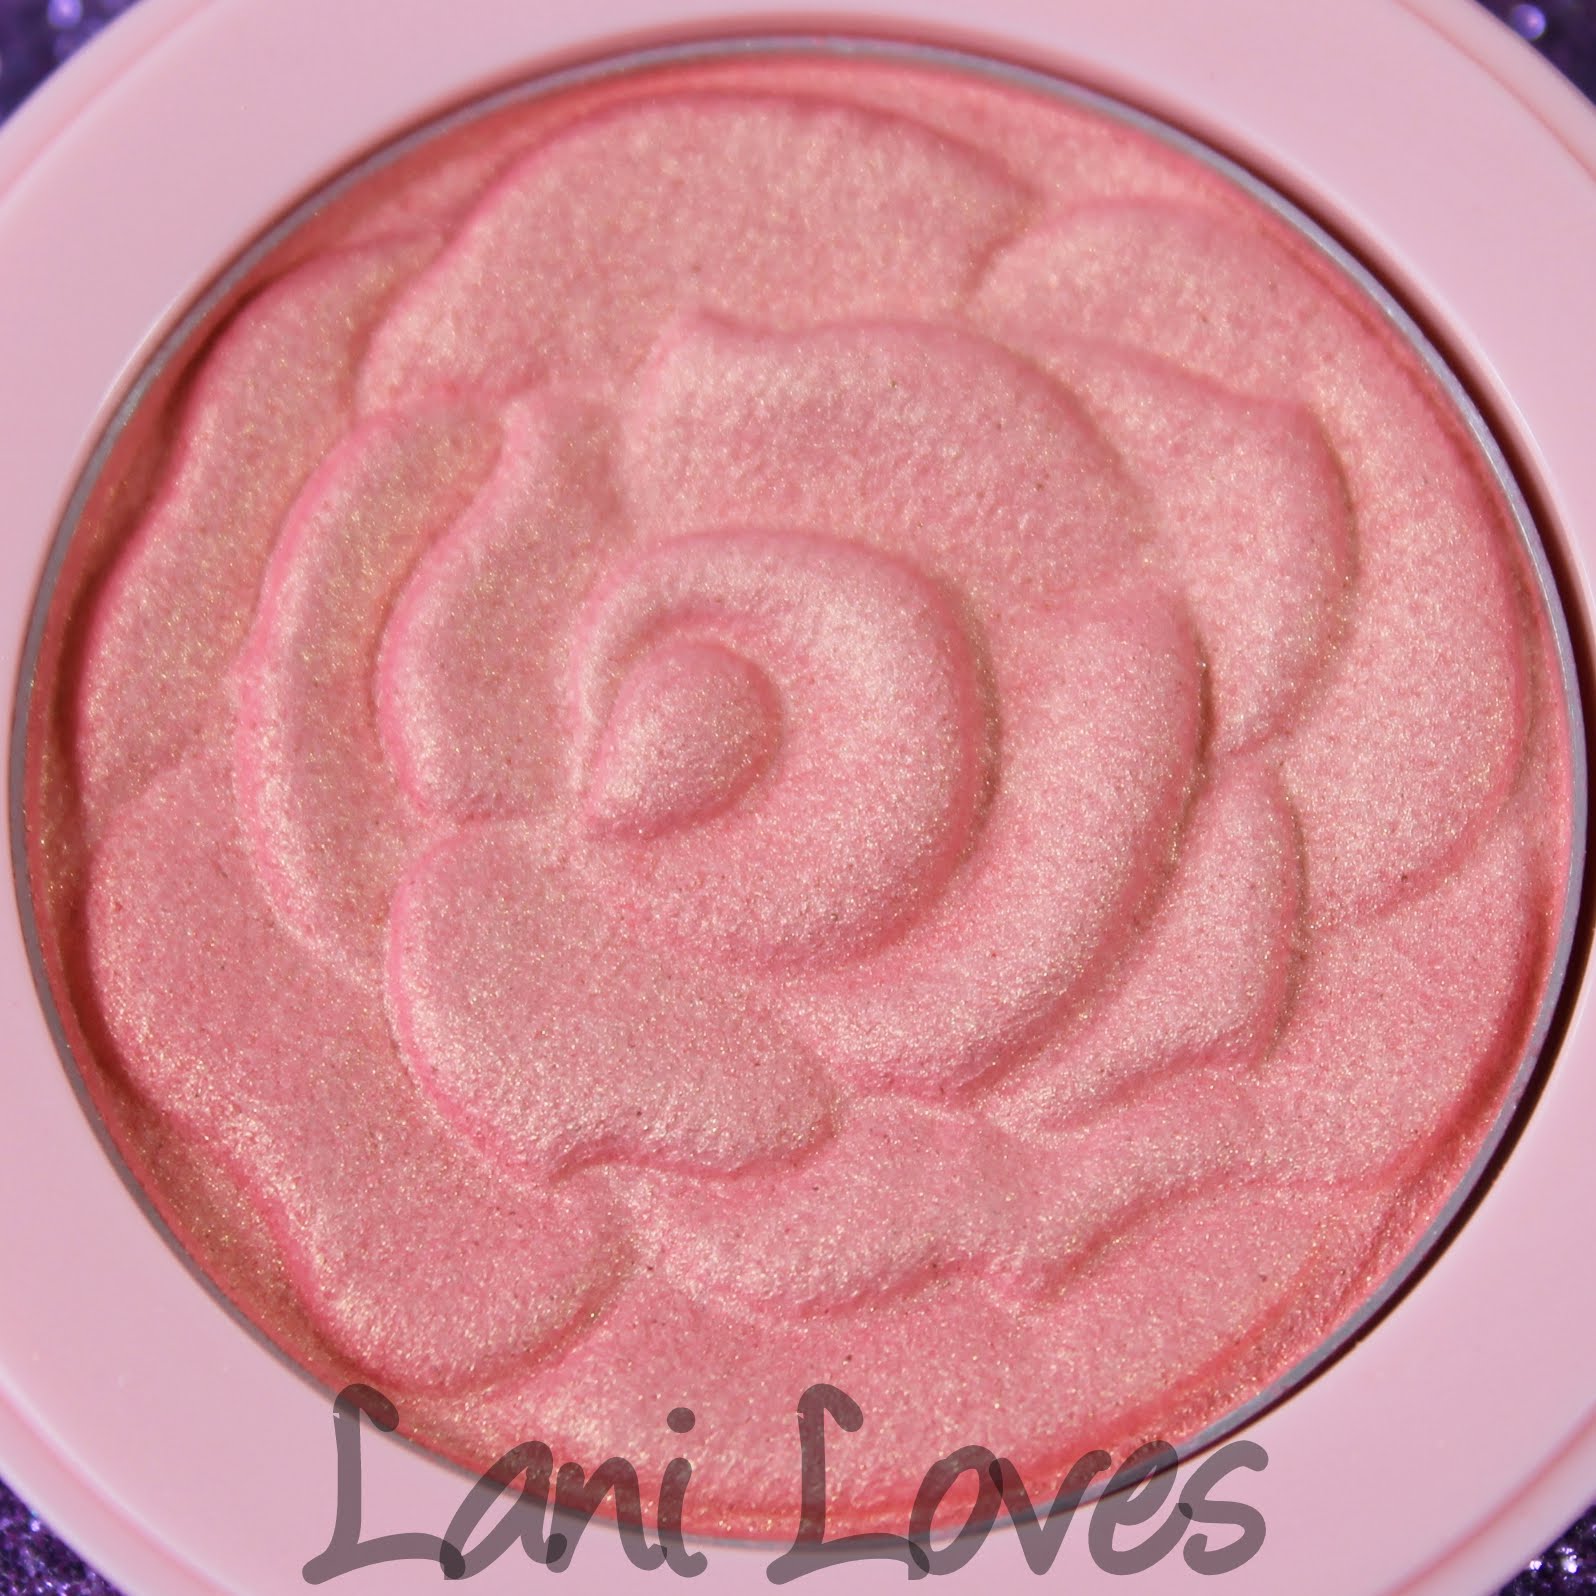 Etude House Princess Happy Ending: Rose Cheek Blusher - Coral Rose Swatches & Review